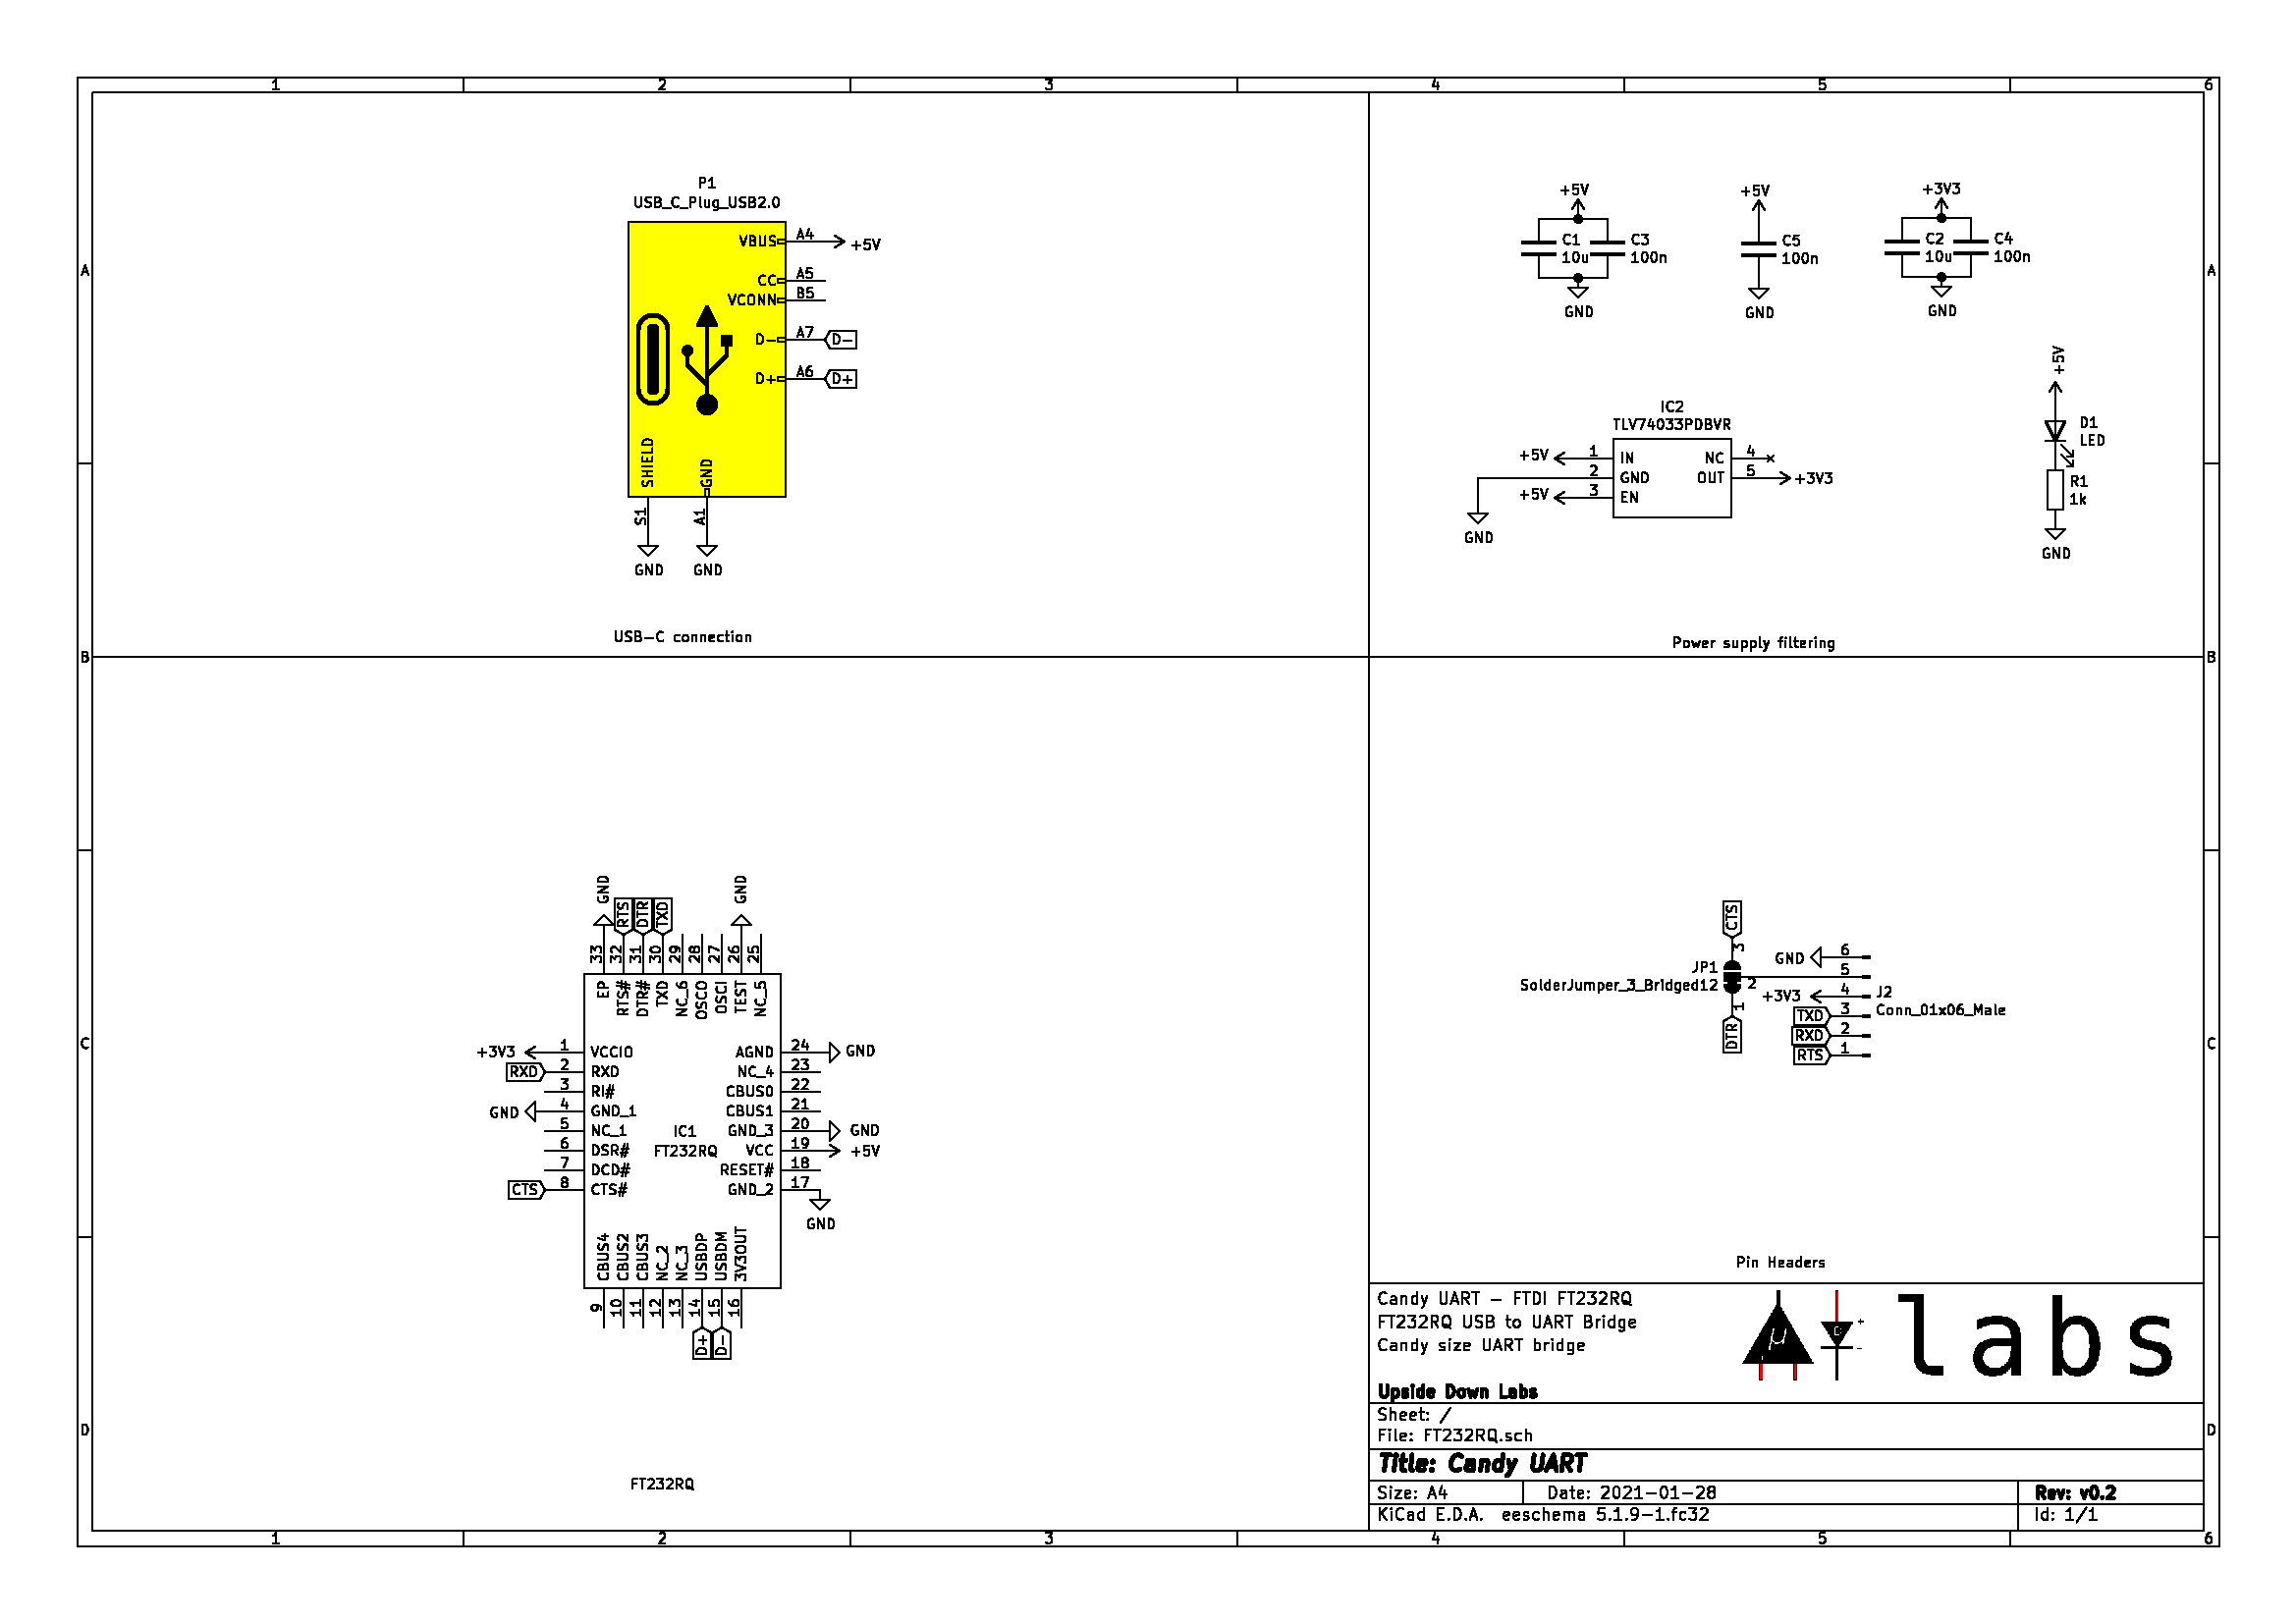 Upside Down Labs Candy UART - FT232RQ schematic